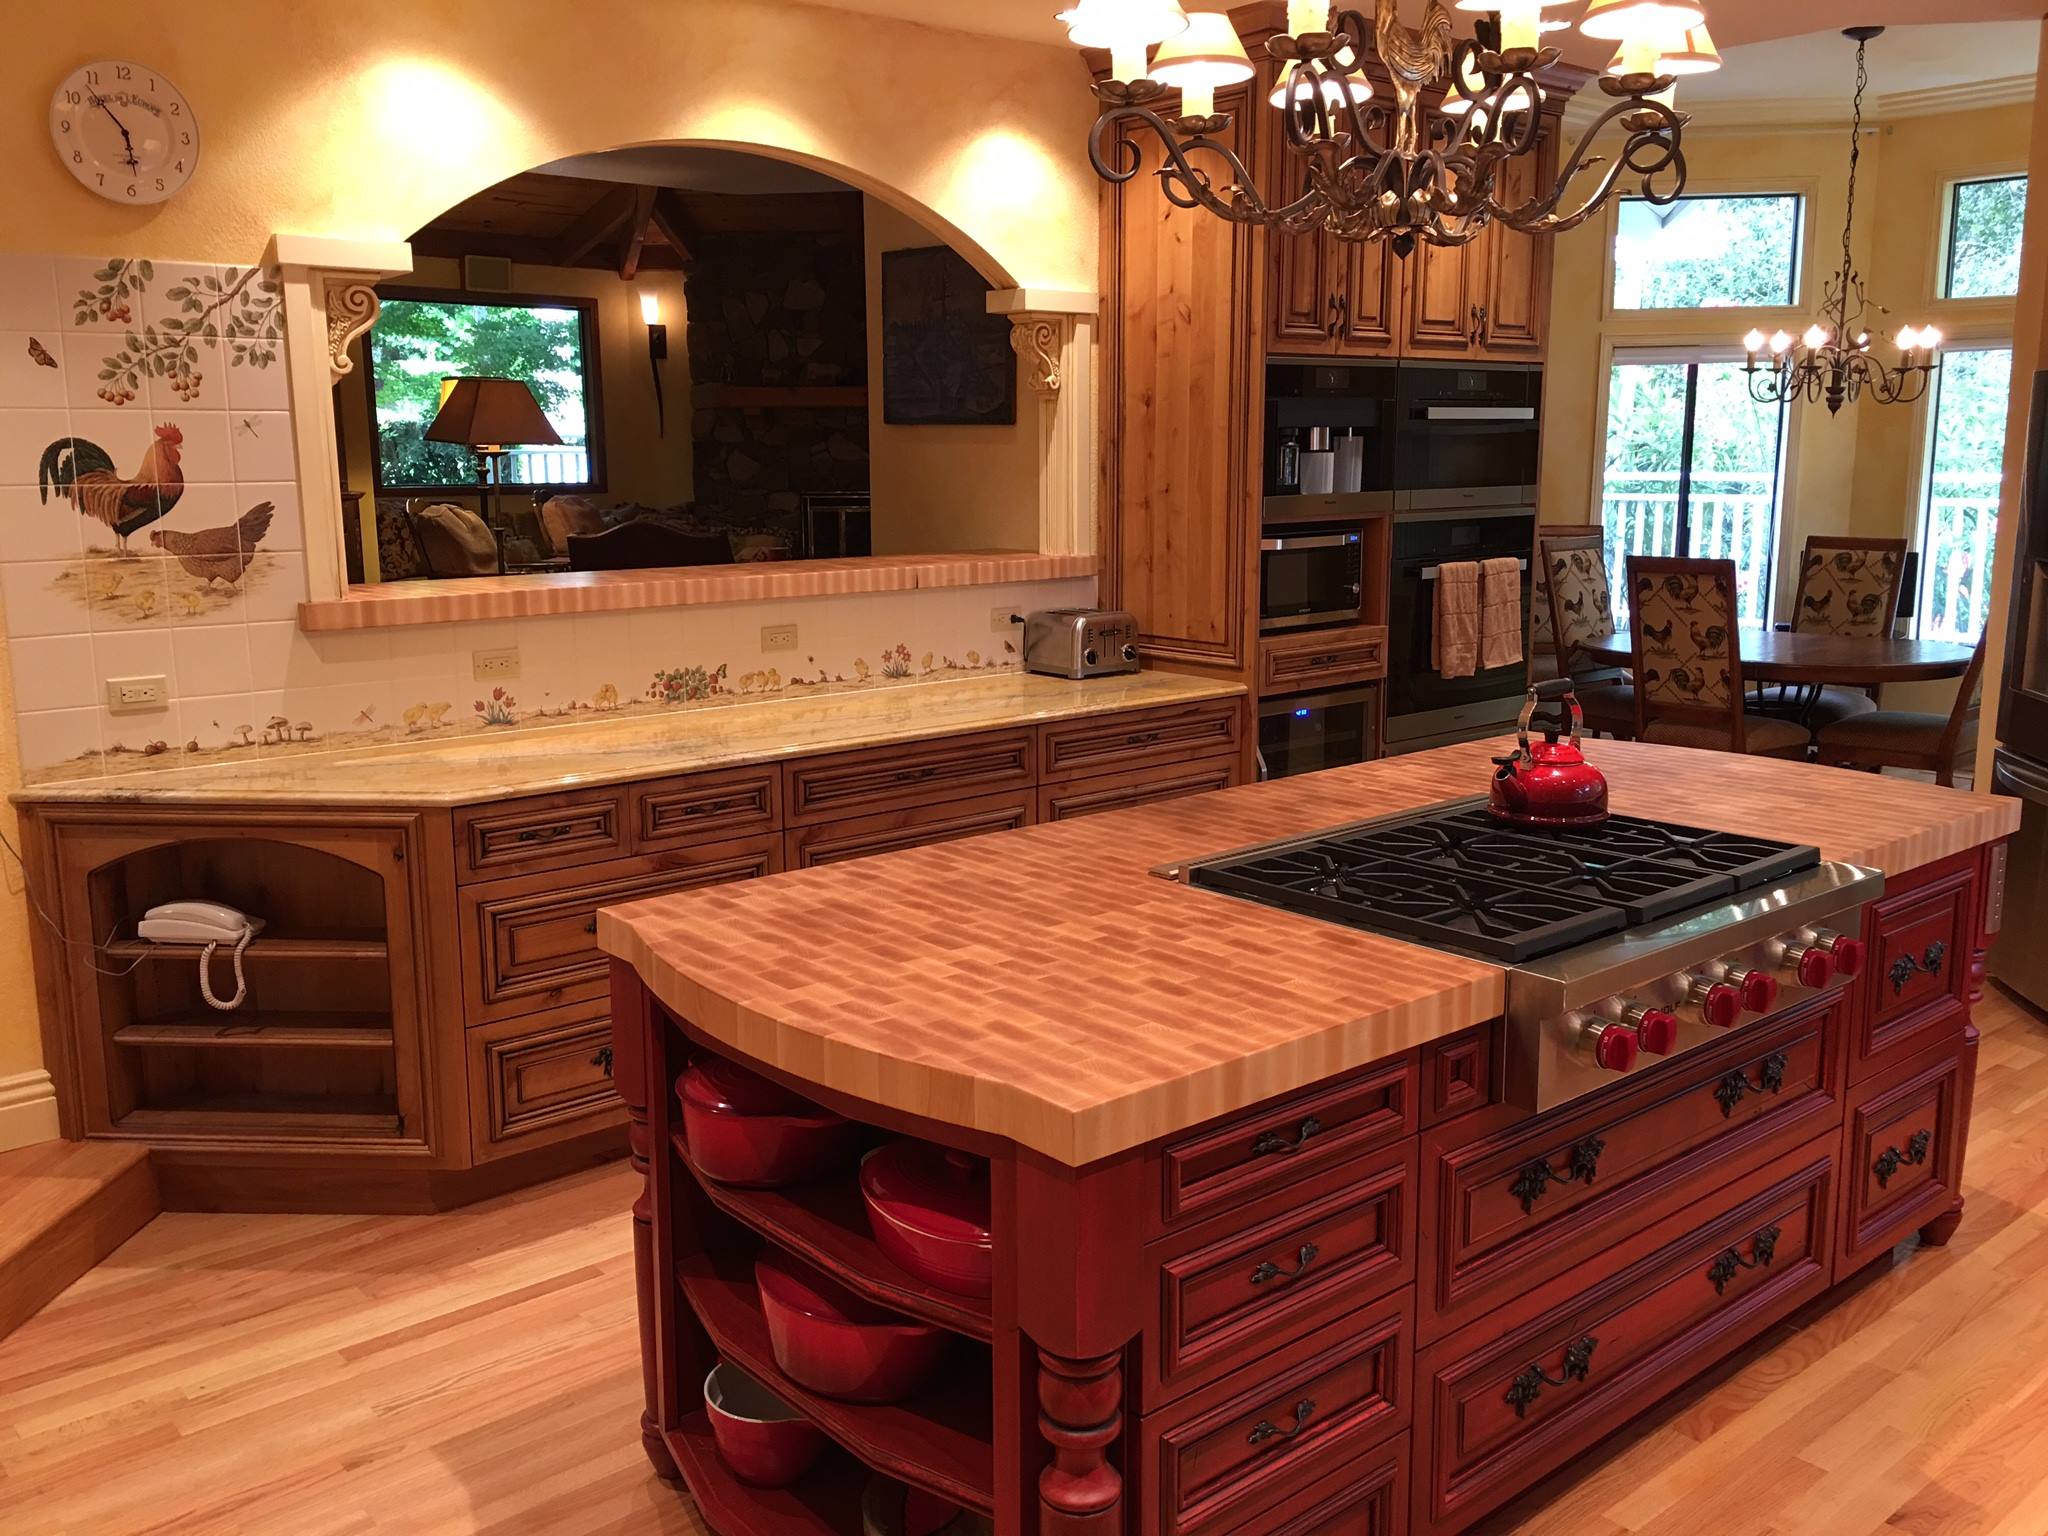 Custom Knotty Alder kitchen cabinetry and Island